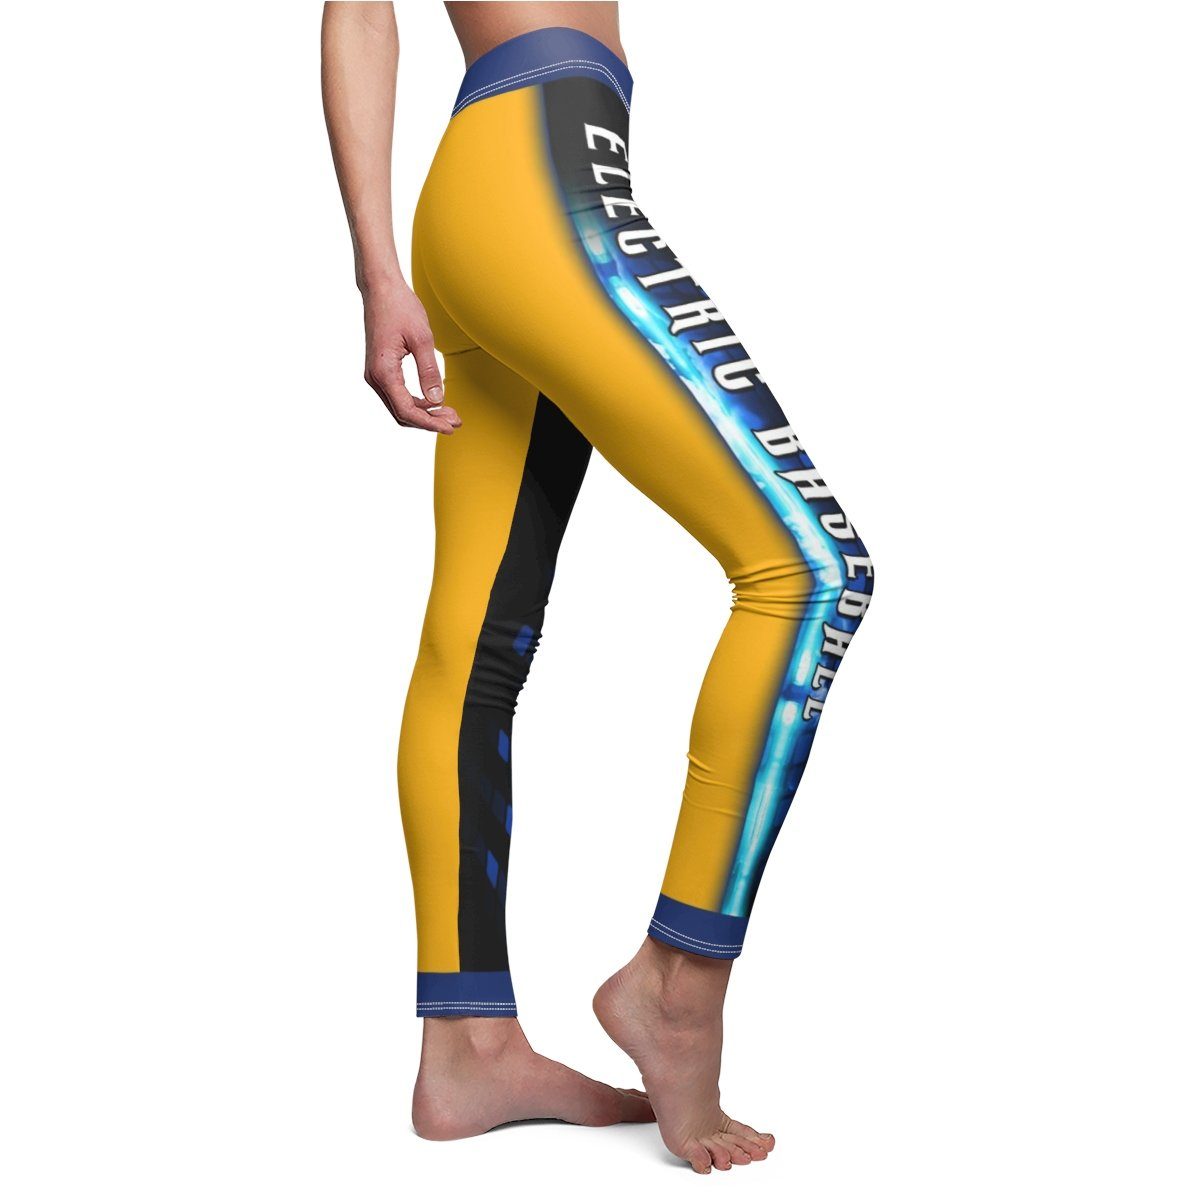 Hatch - V.5 - Extreme Sportswear Cut & Sew Leggings Template-Photoshop Template - Photo Solutions